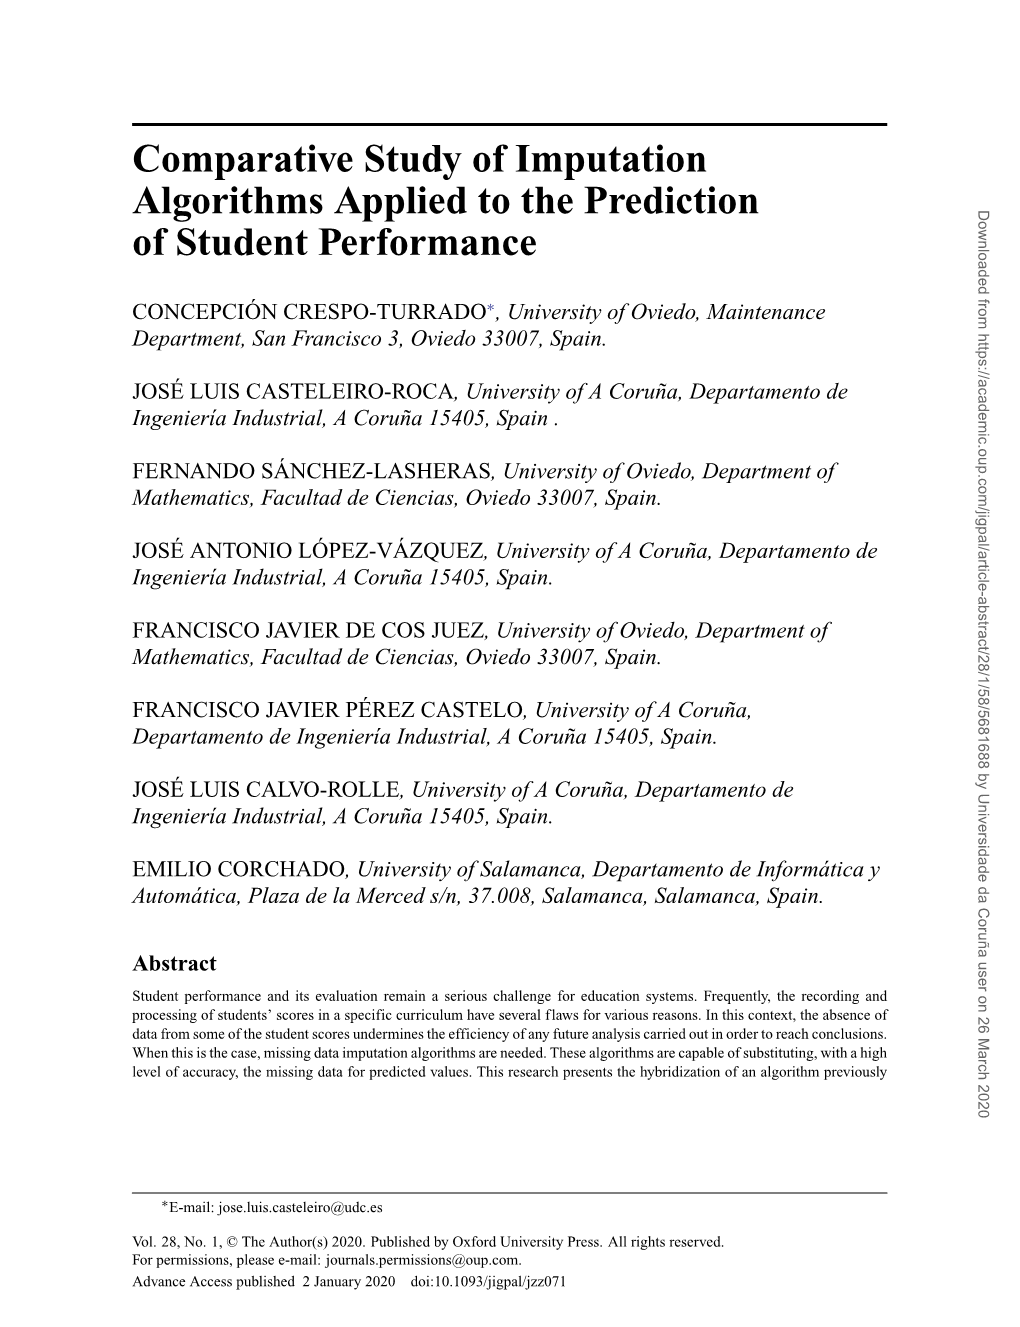 Comparative Study of Imputation Algorithms Applied To